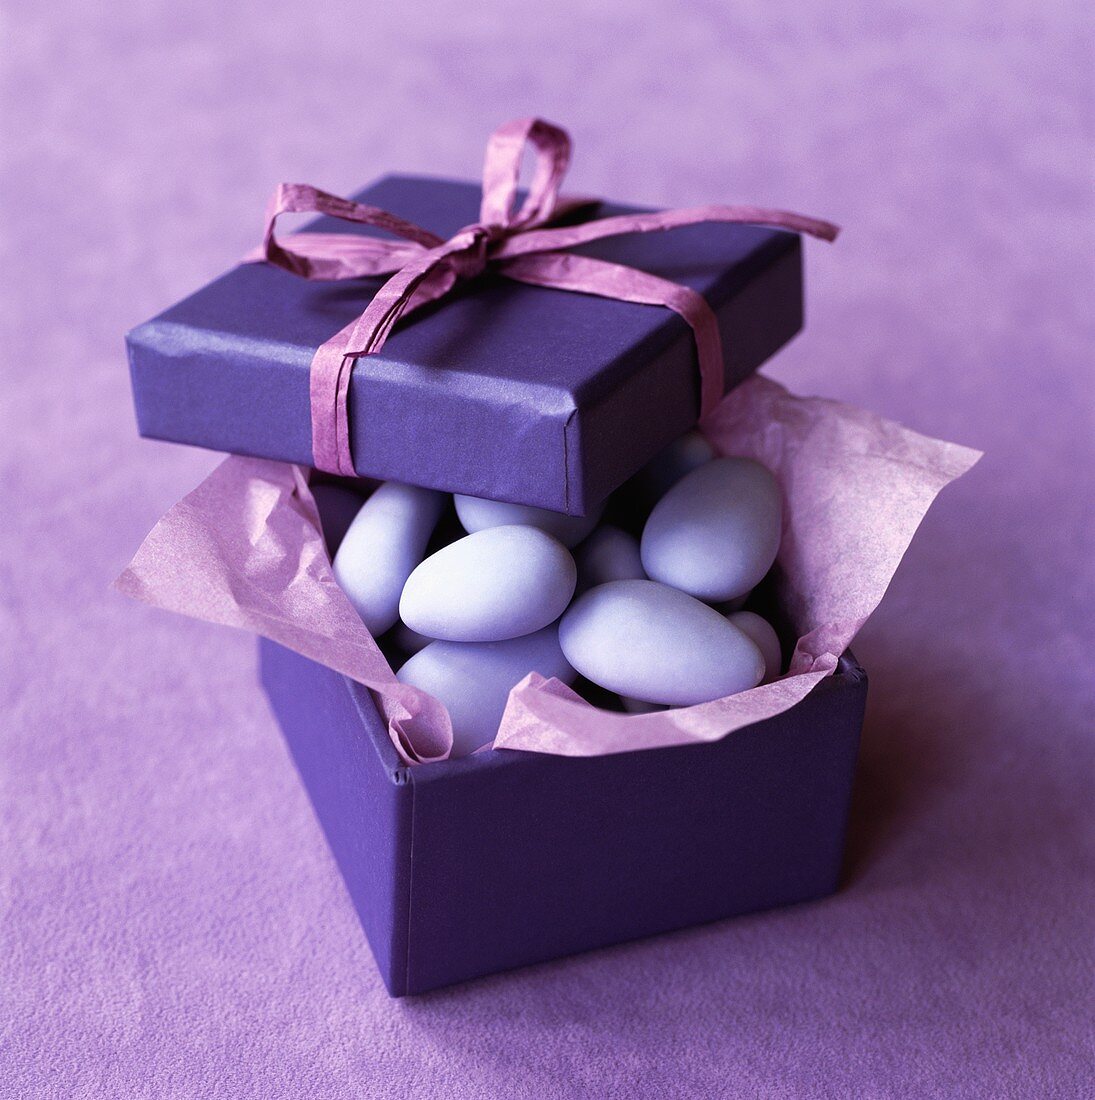 Sugared almonds to give as a gift